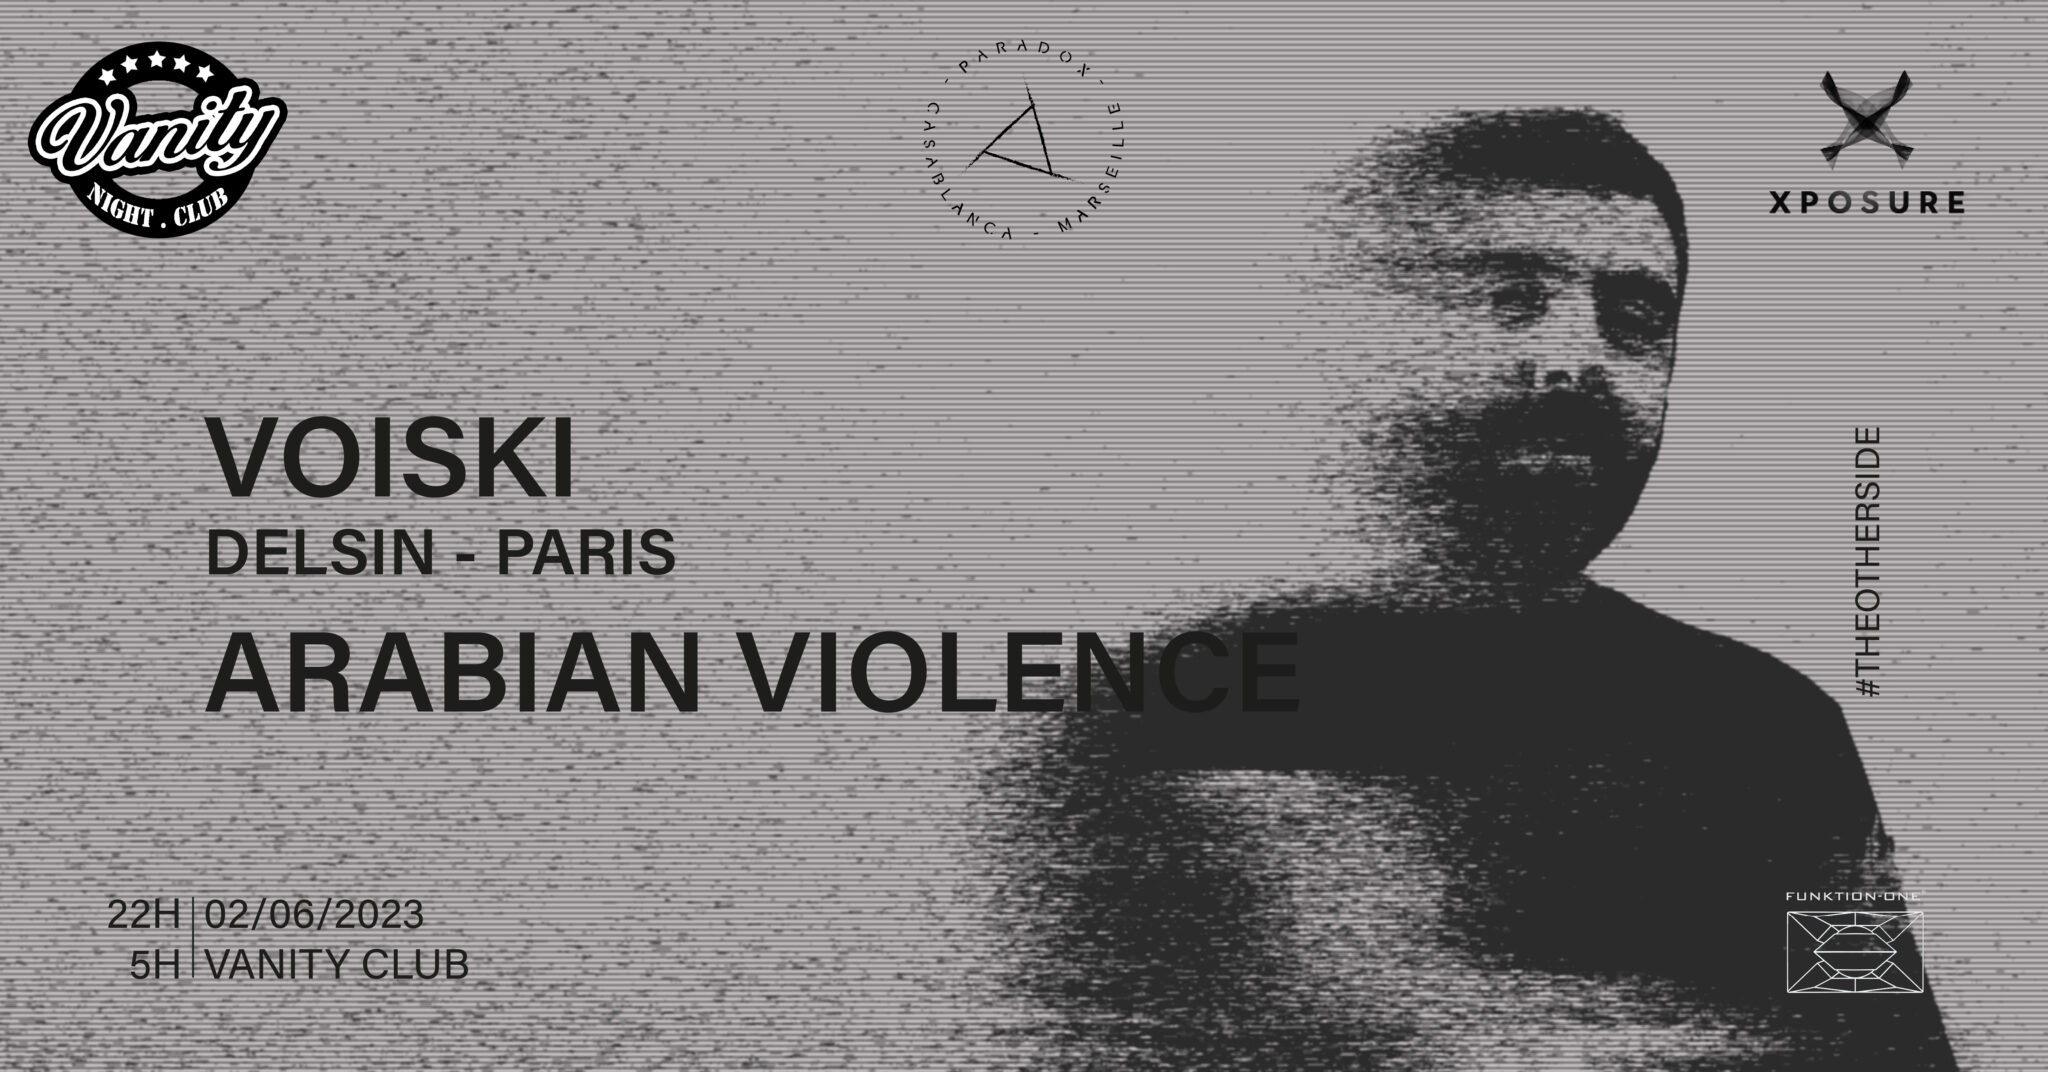 Artwork of Paradox event with VOISKI and ARABIAN VIOLENCE on June 2, 2023 at Vanity Club